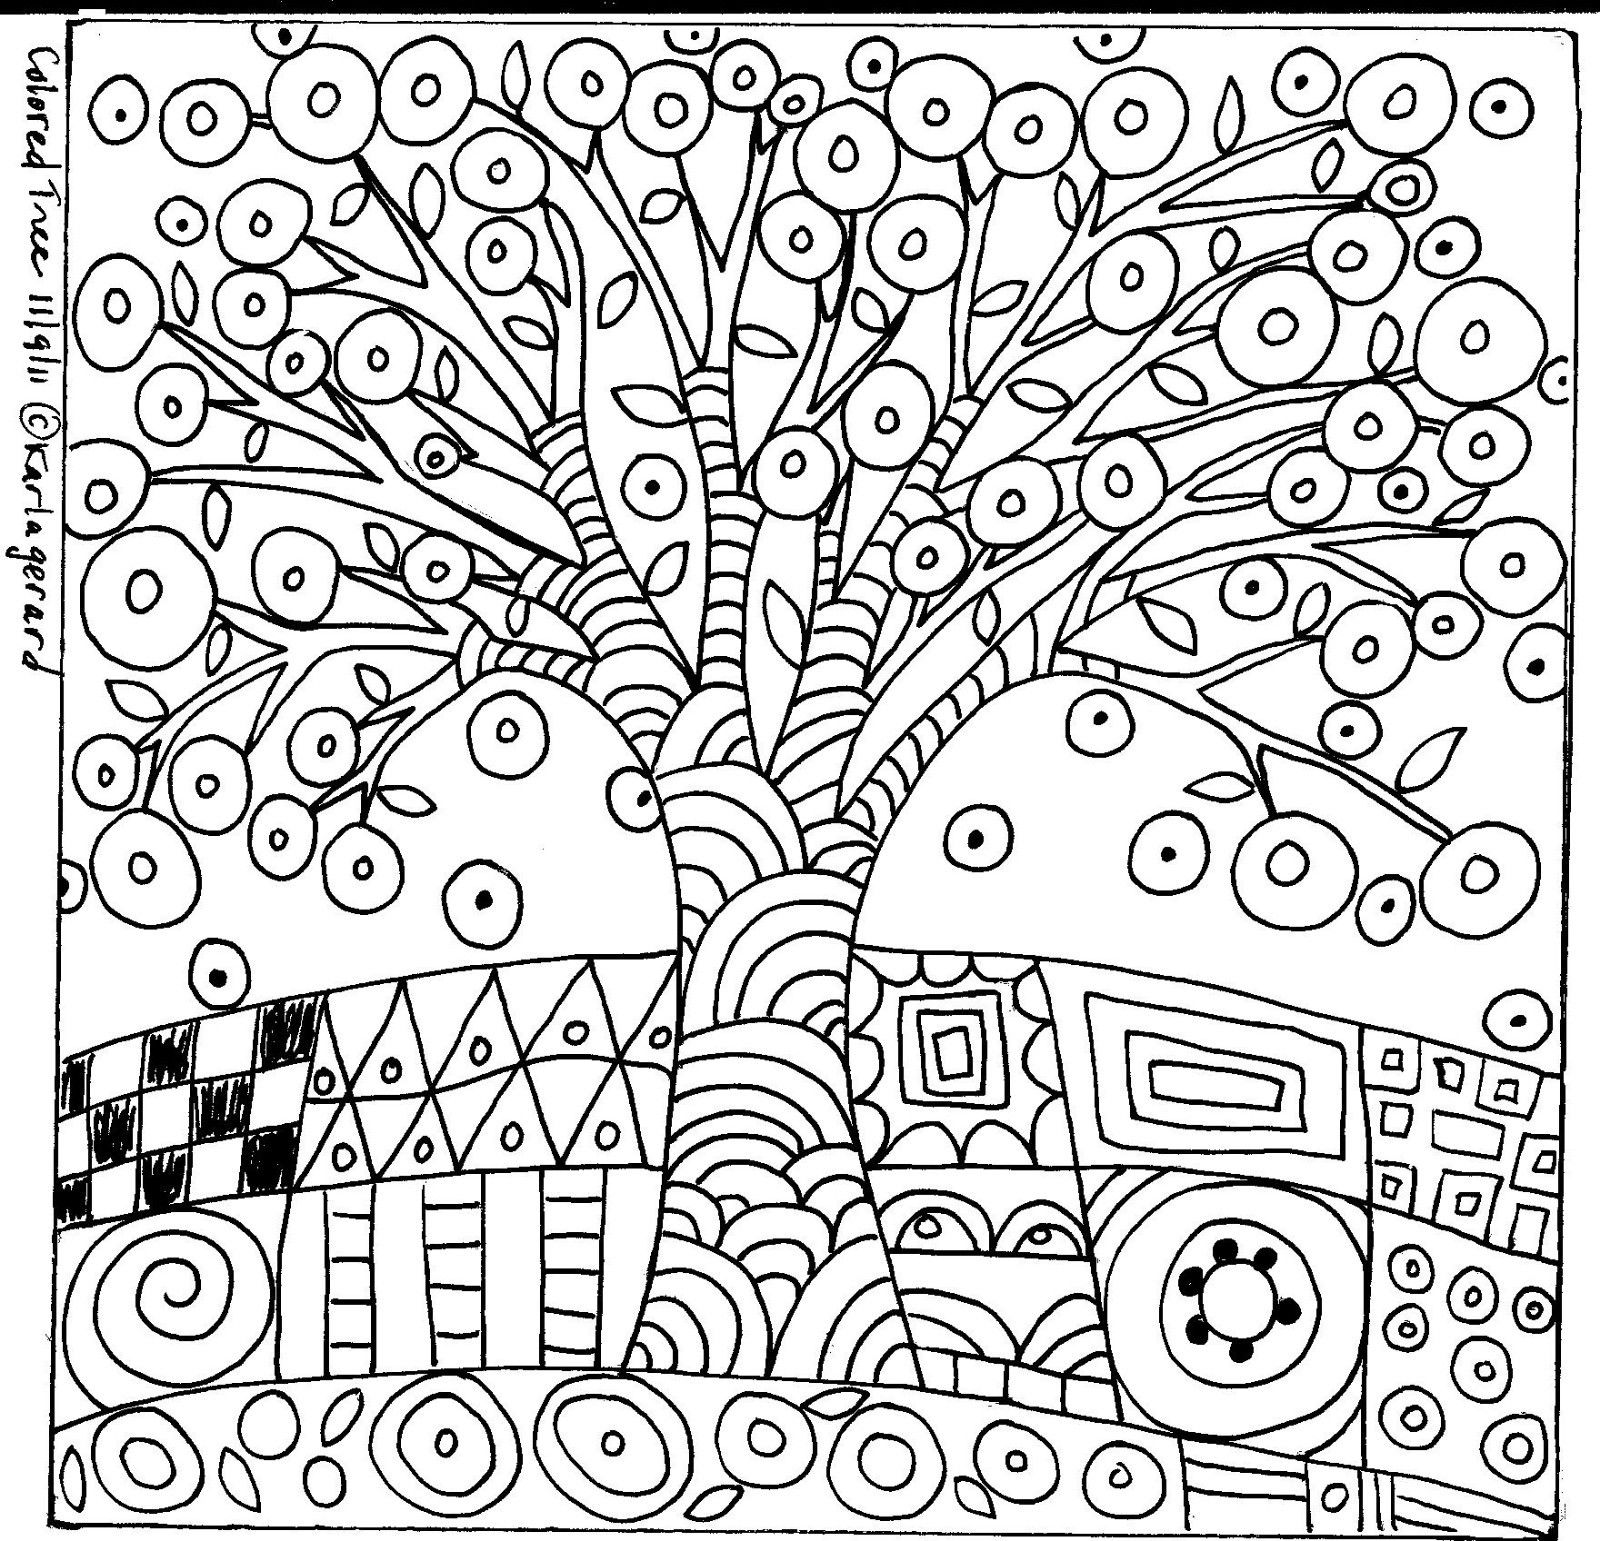 Modern Art Coloring Pages at GetDrawings | Free download